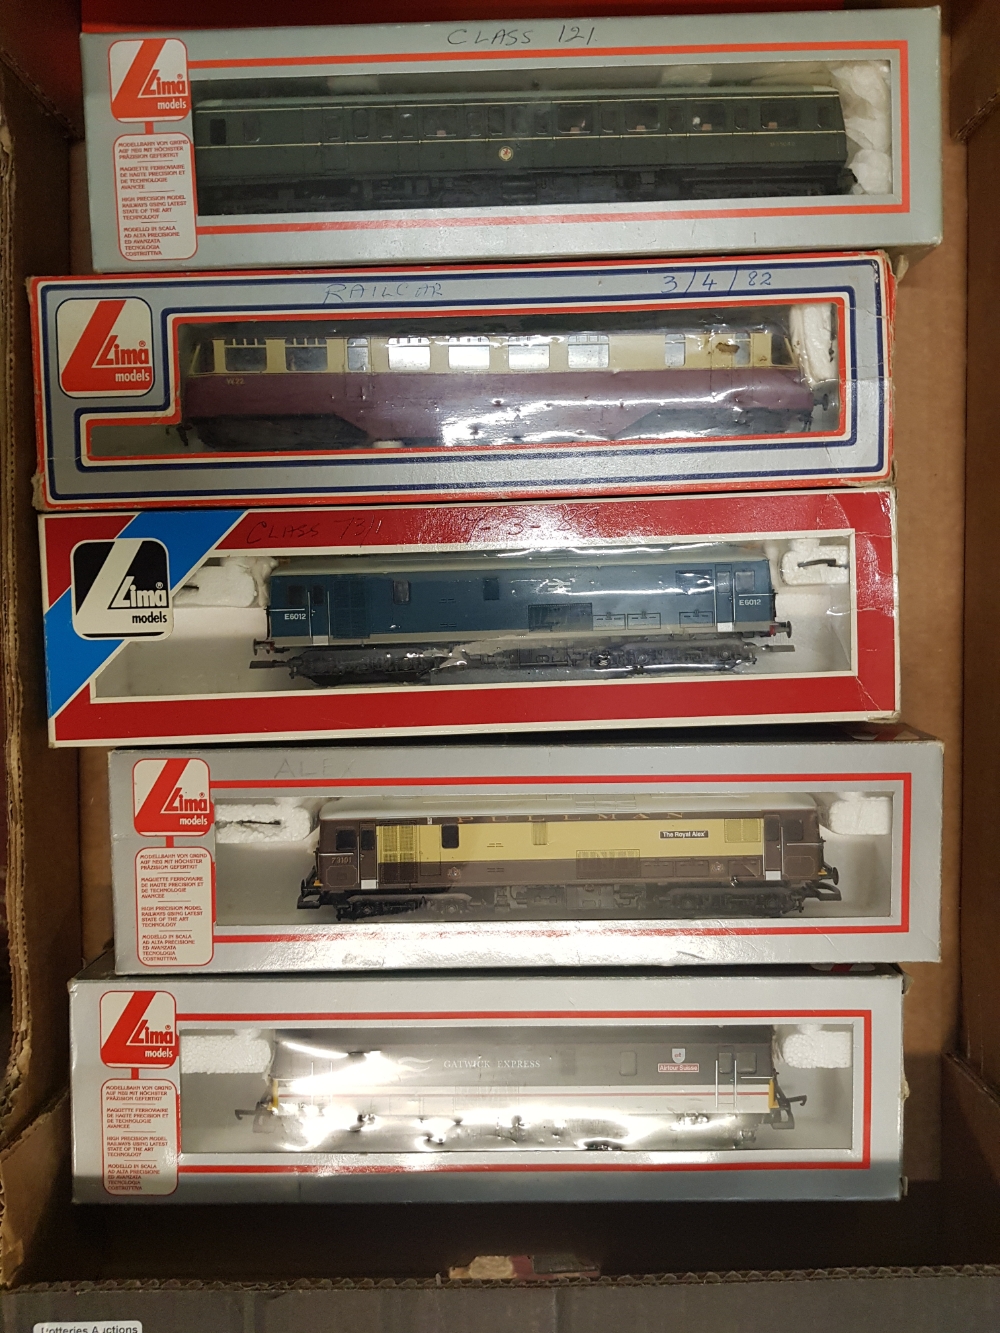 5 individual Lima Model Railways/ Locomotives and carriages consisting of Gatwick Express 73212, The